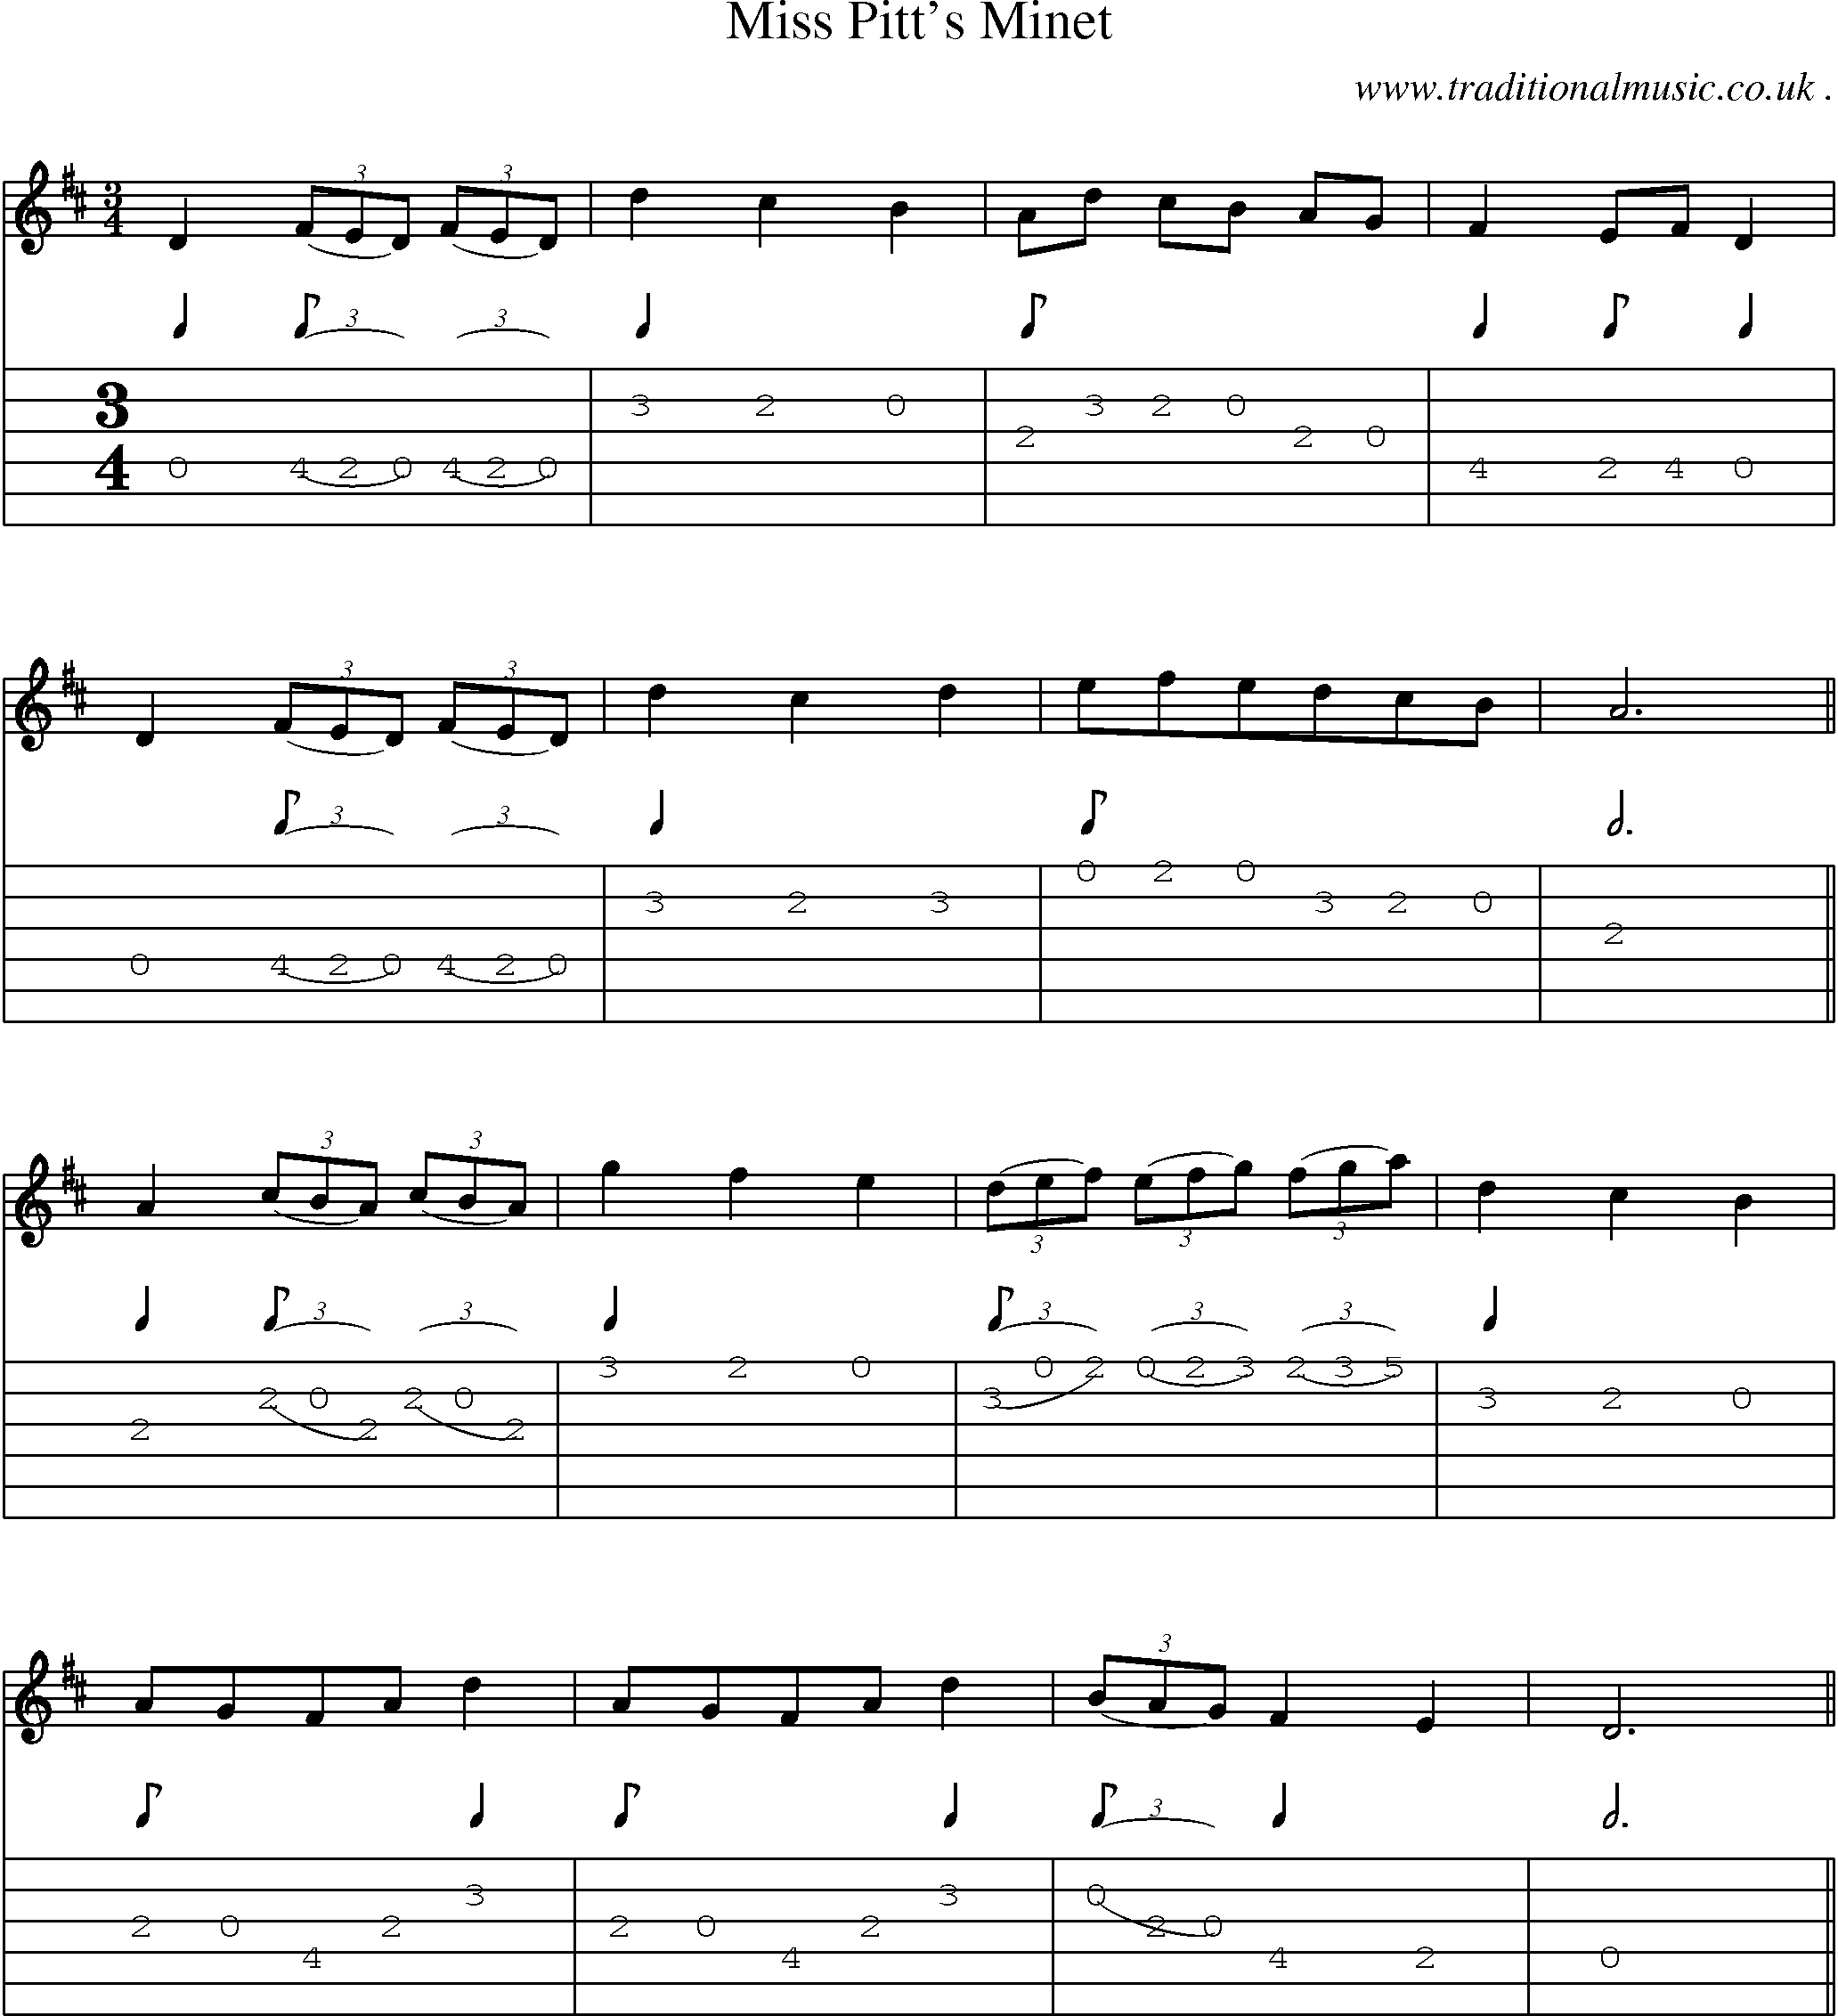 Sheet-Music and Guitar Tabs for Miss Pitts Minet